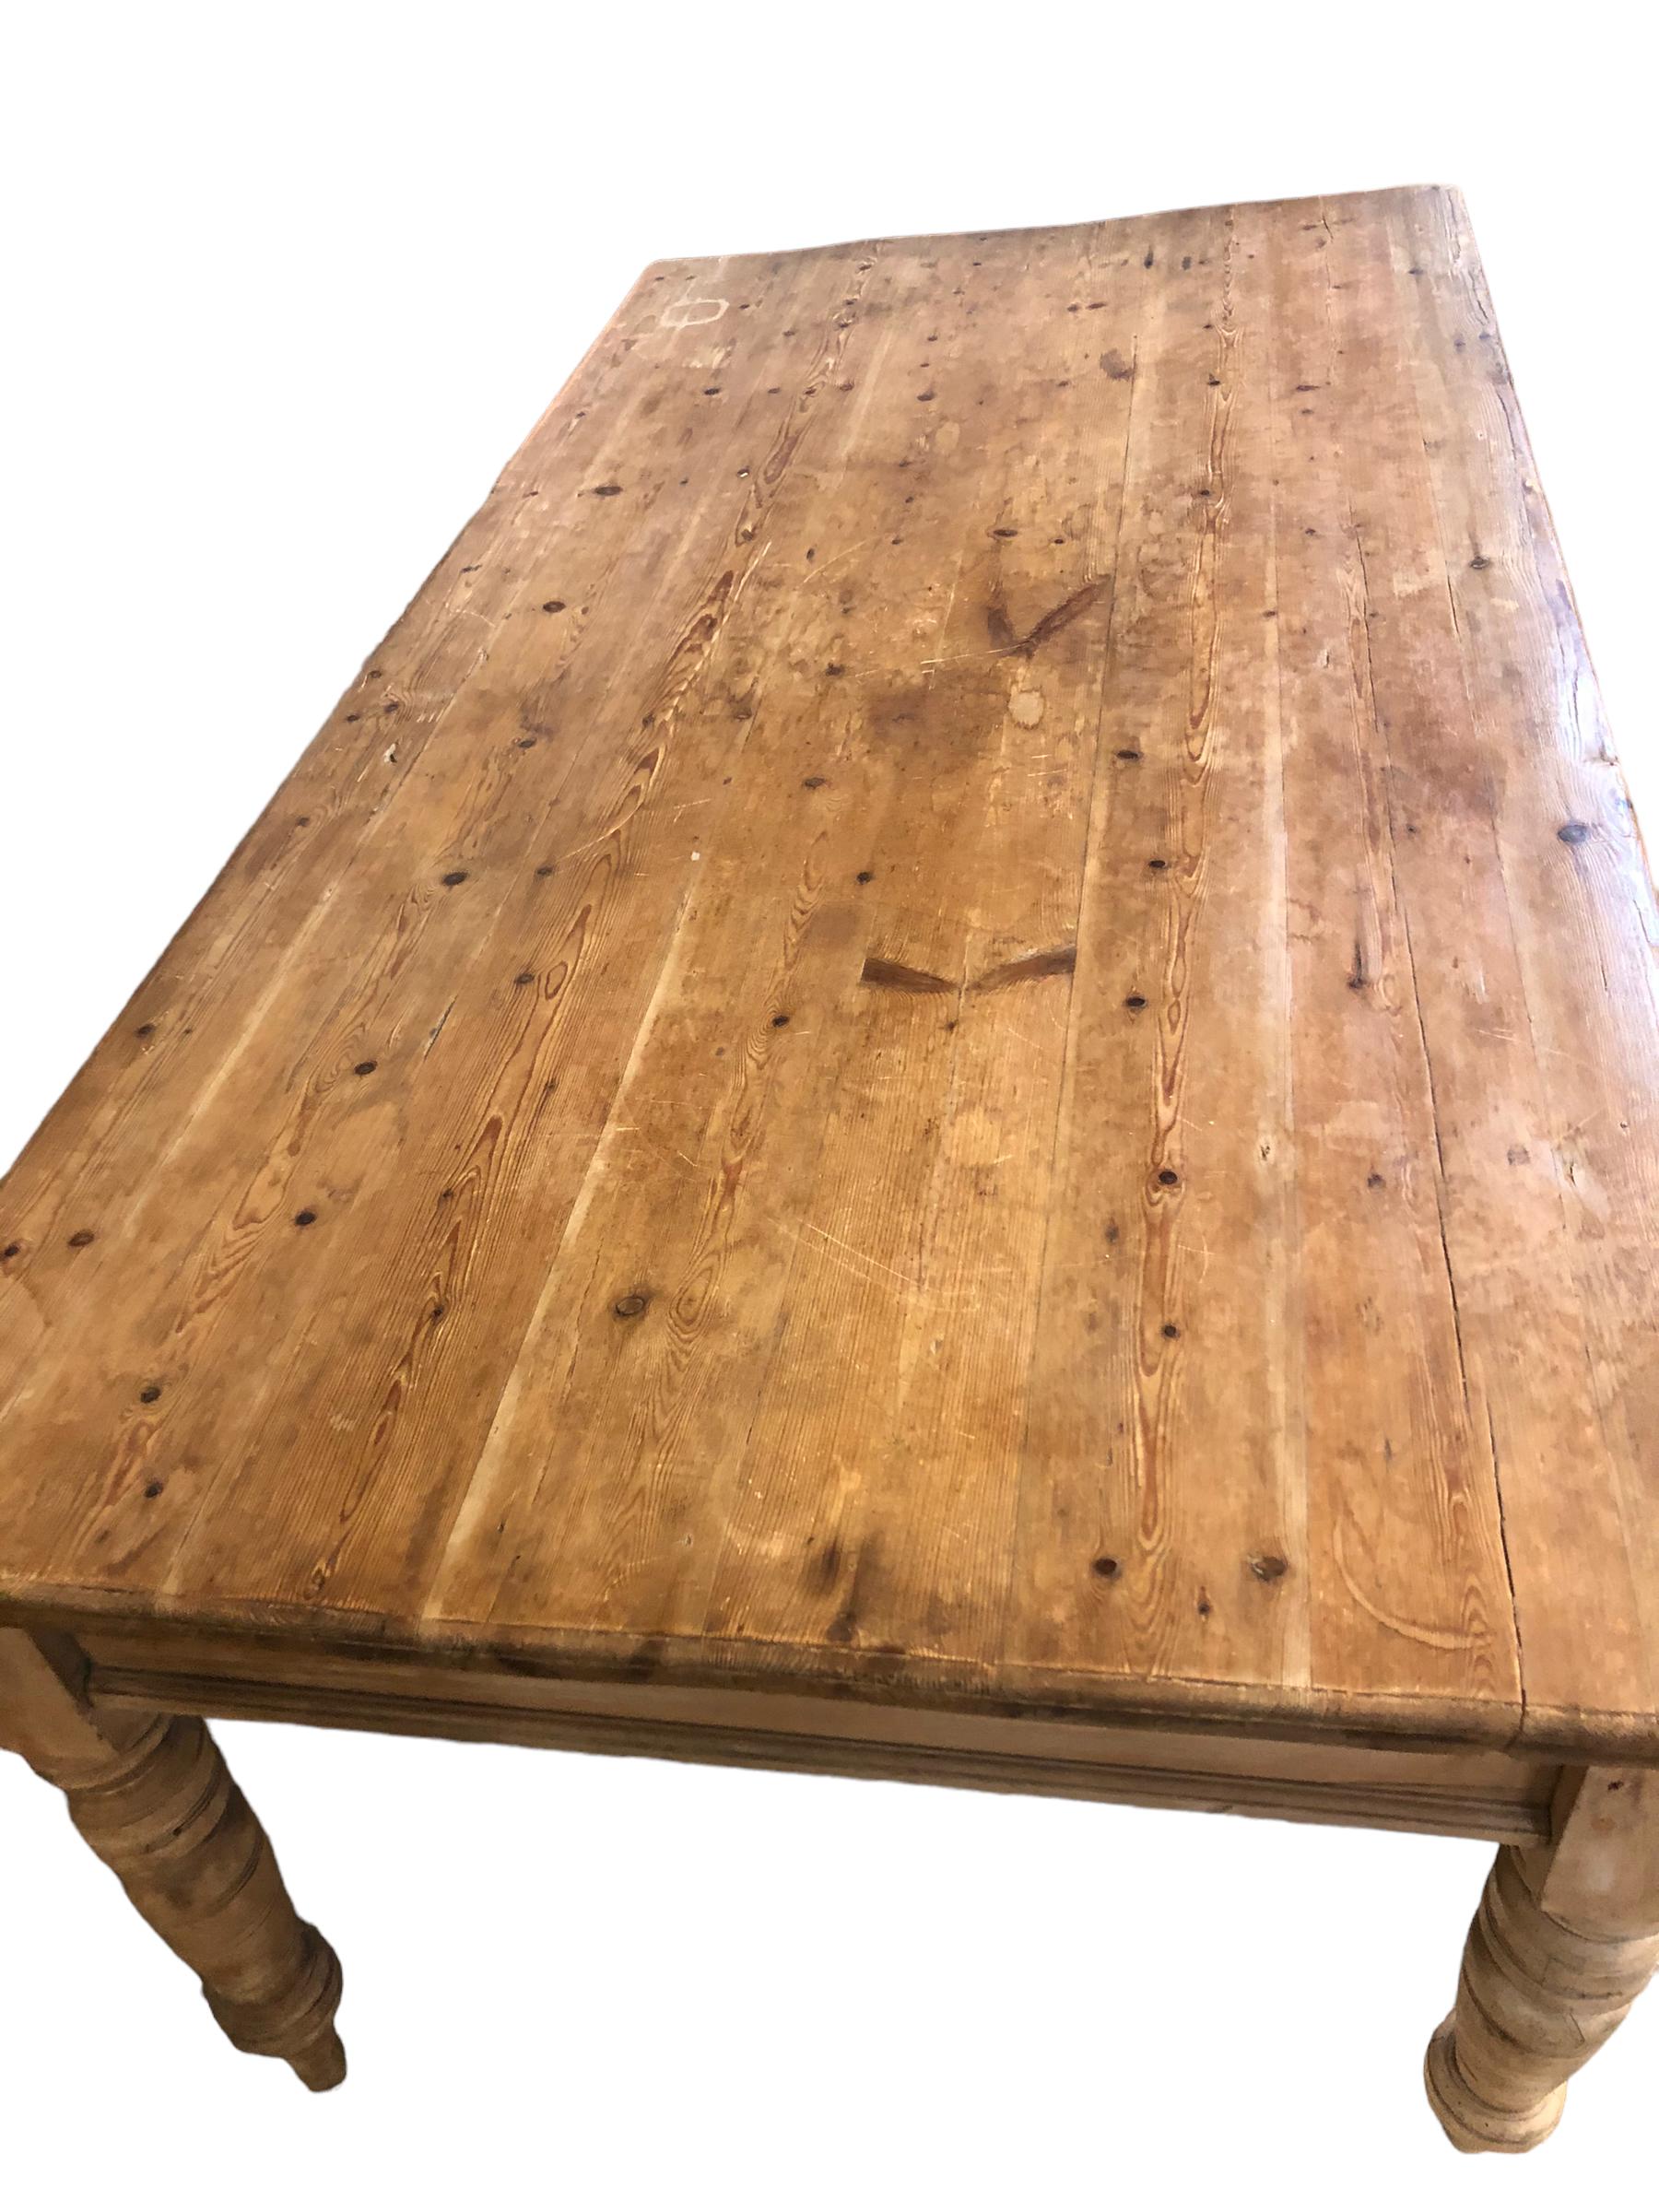 Early 20th Century English Country Pine Farm Table For Sale